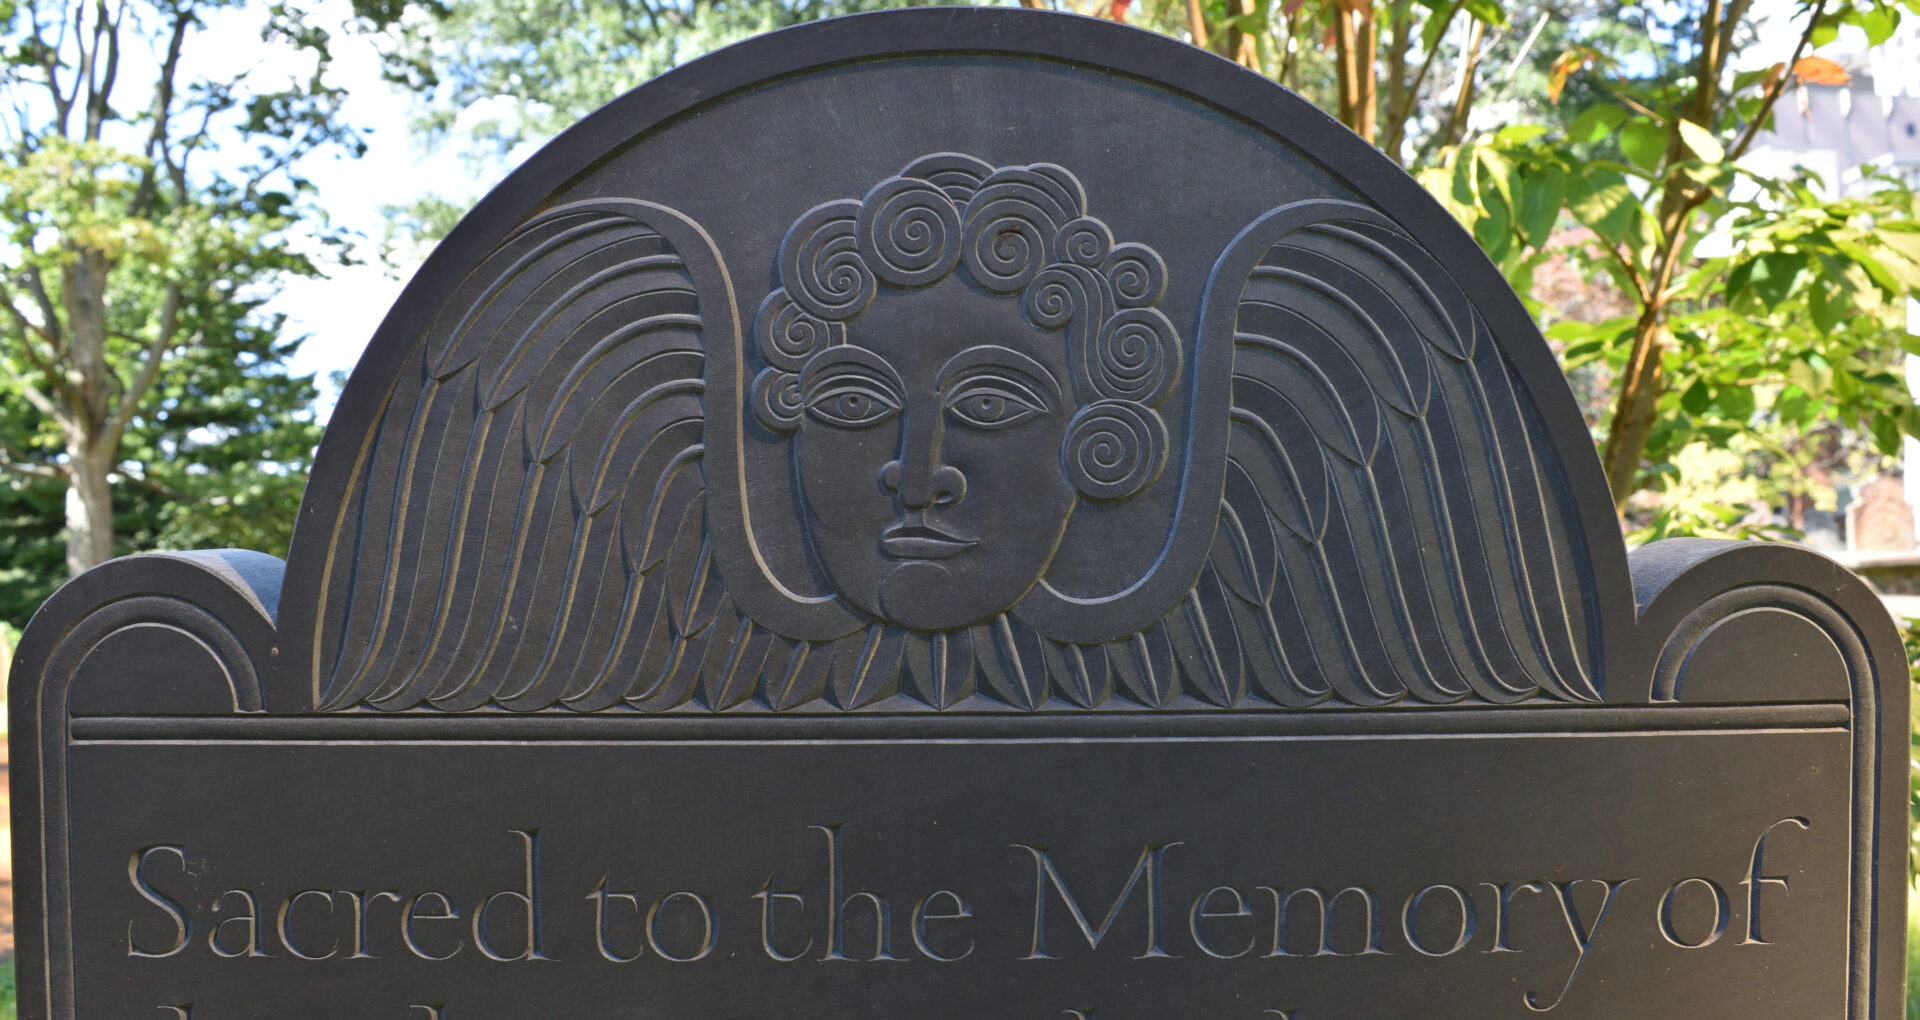 Detailed photo of the "tympanum" (decorative top section) of the African American monument's headstone